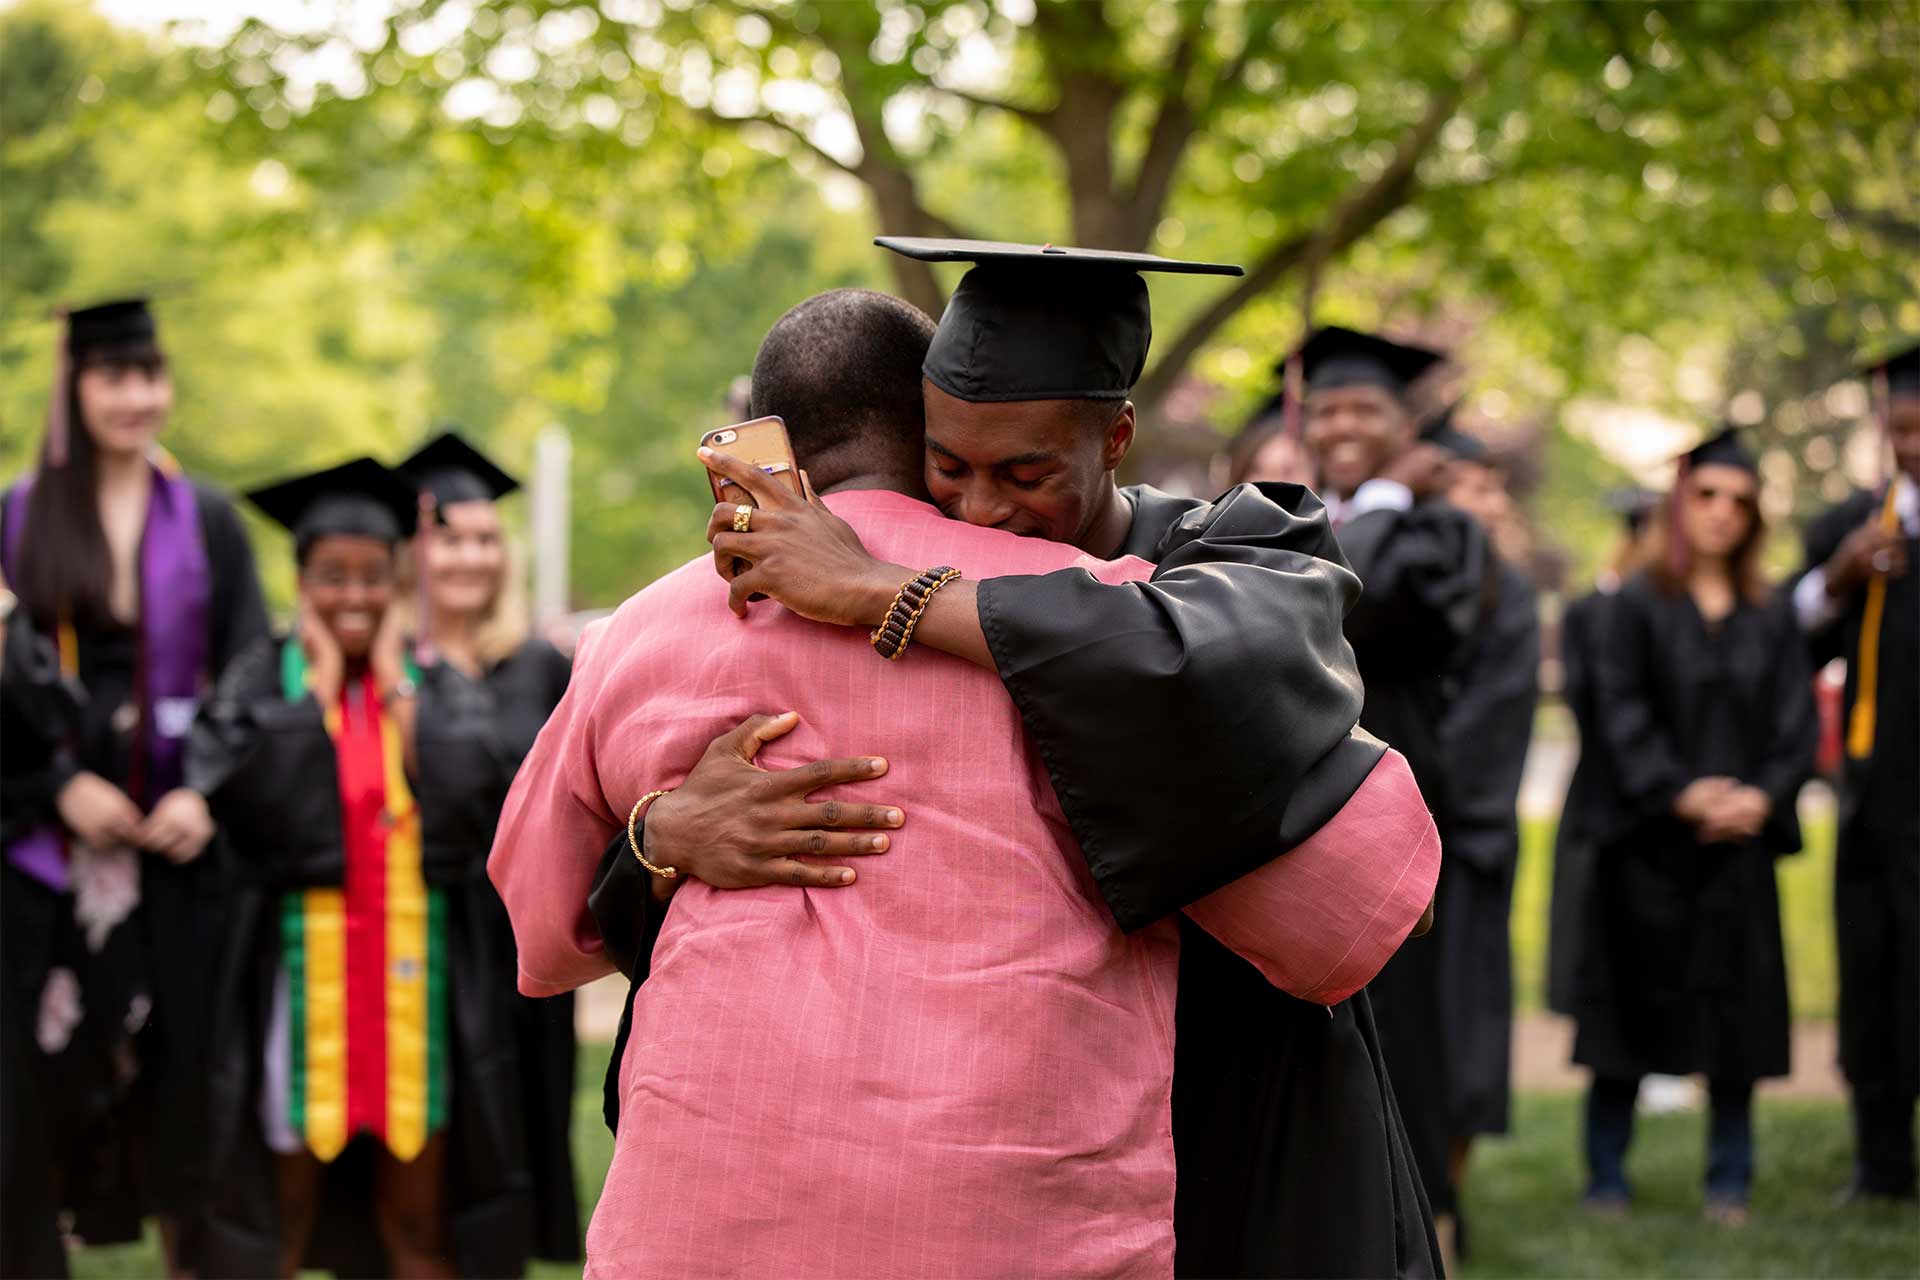 A student hugs a friend after Commencement.